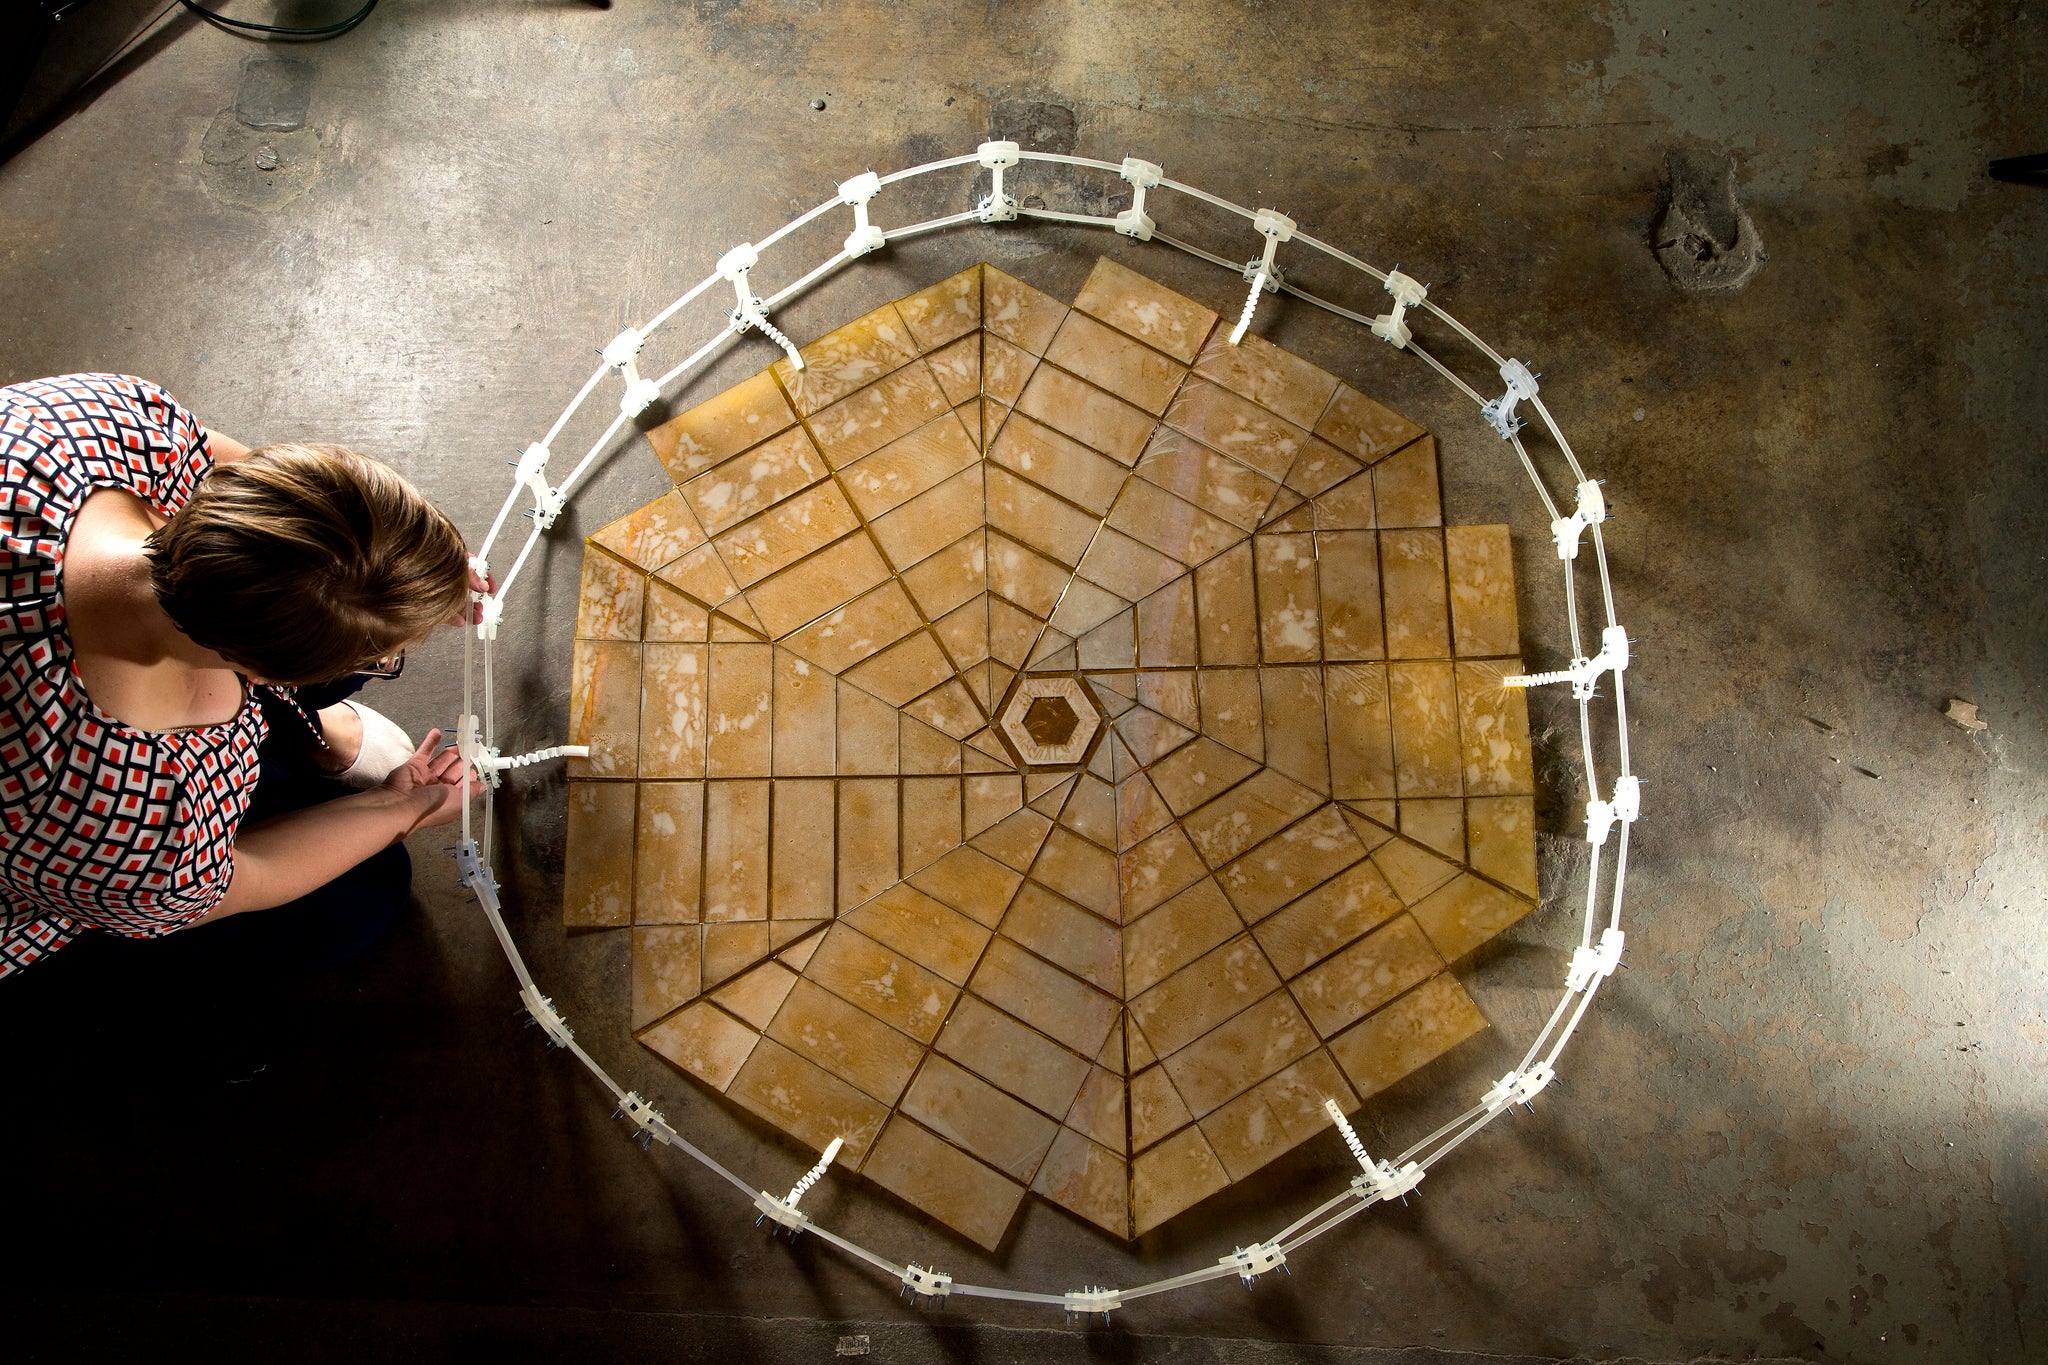 Shannon Zirbel, a Ph.D. student in mechanical engineering at Brigham Young University, Provo, Utah, unfolds a solar panel array that was designed using the principles of origami. She worked on this project with Brian Trease at NASA's Jet Propulsion Laboratory, Pasadena, California.